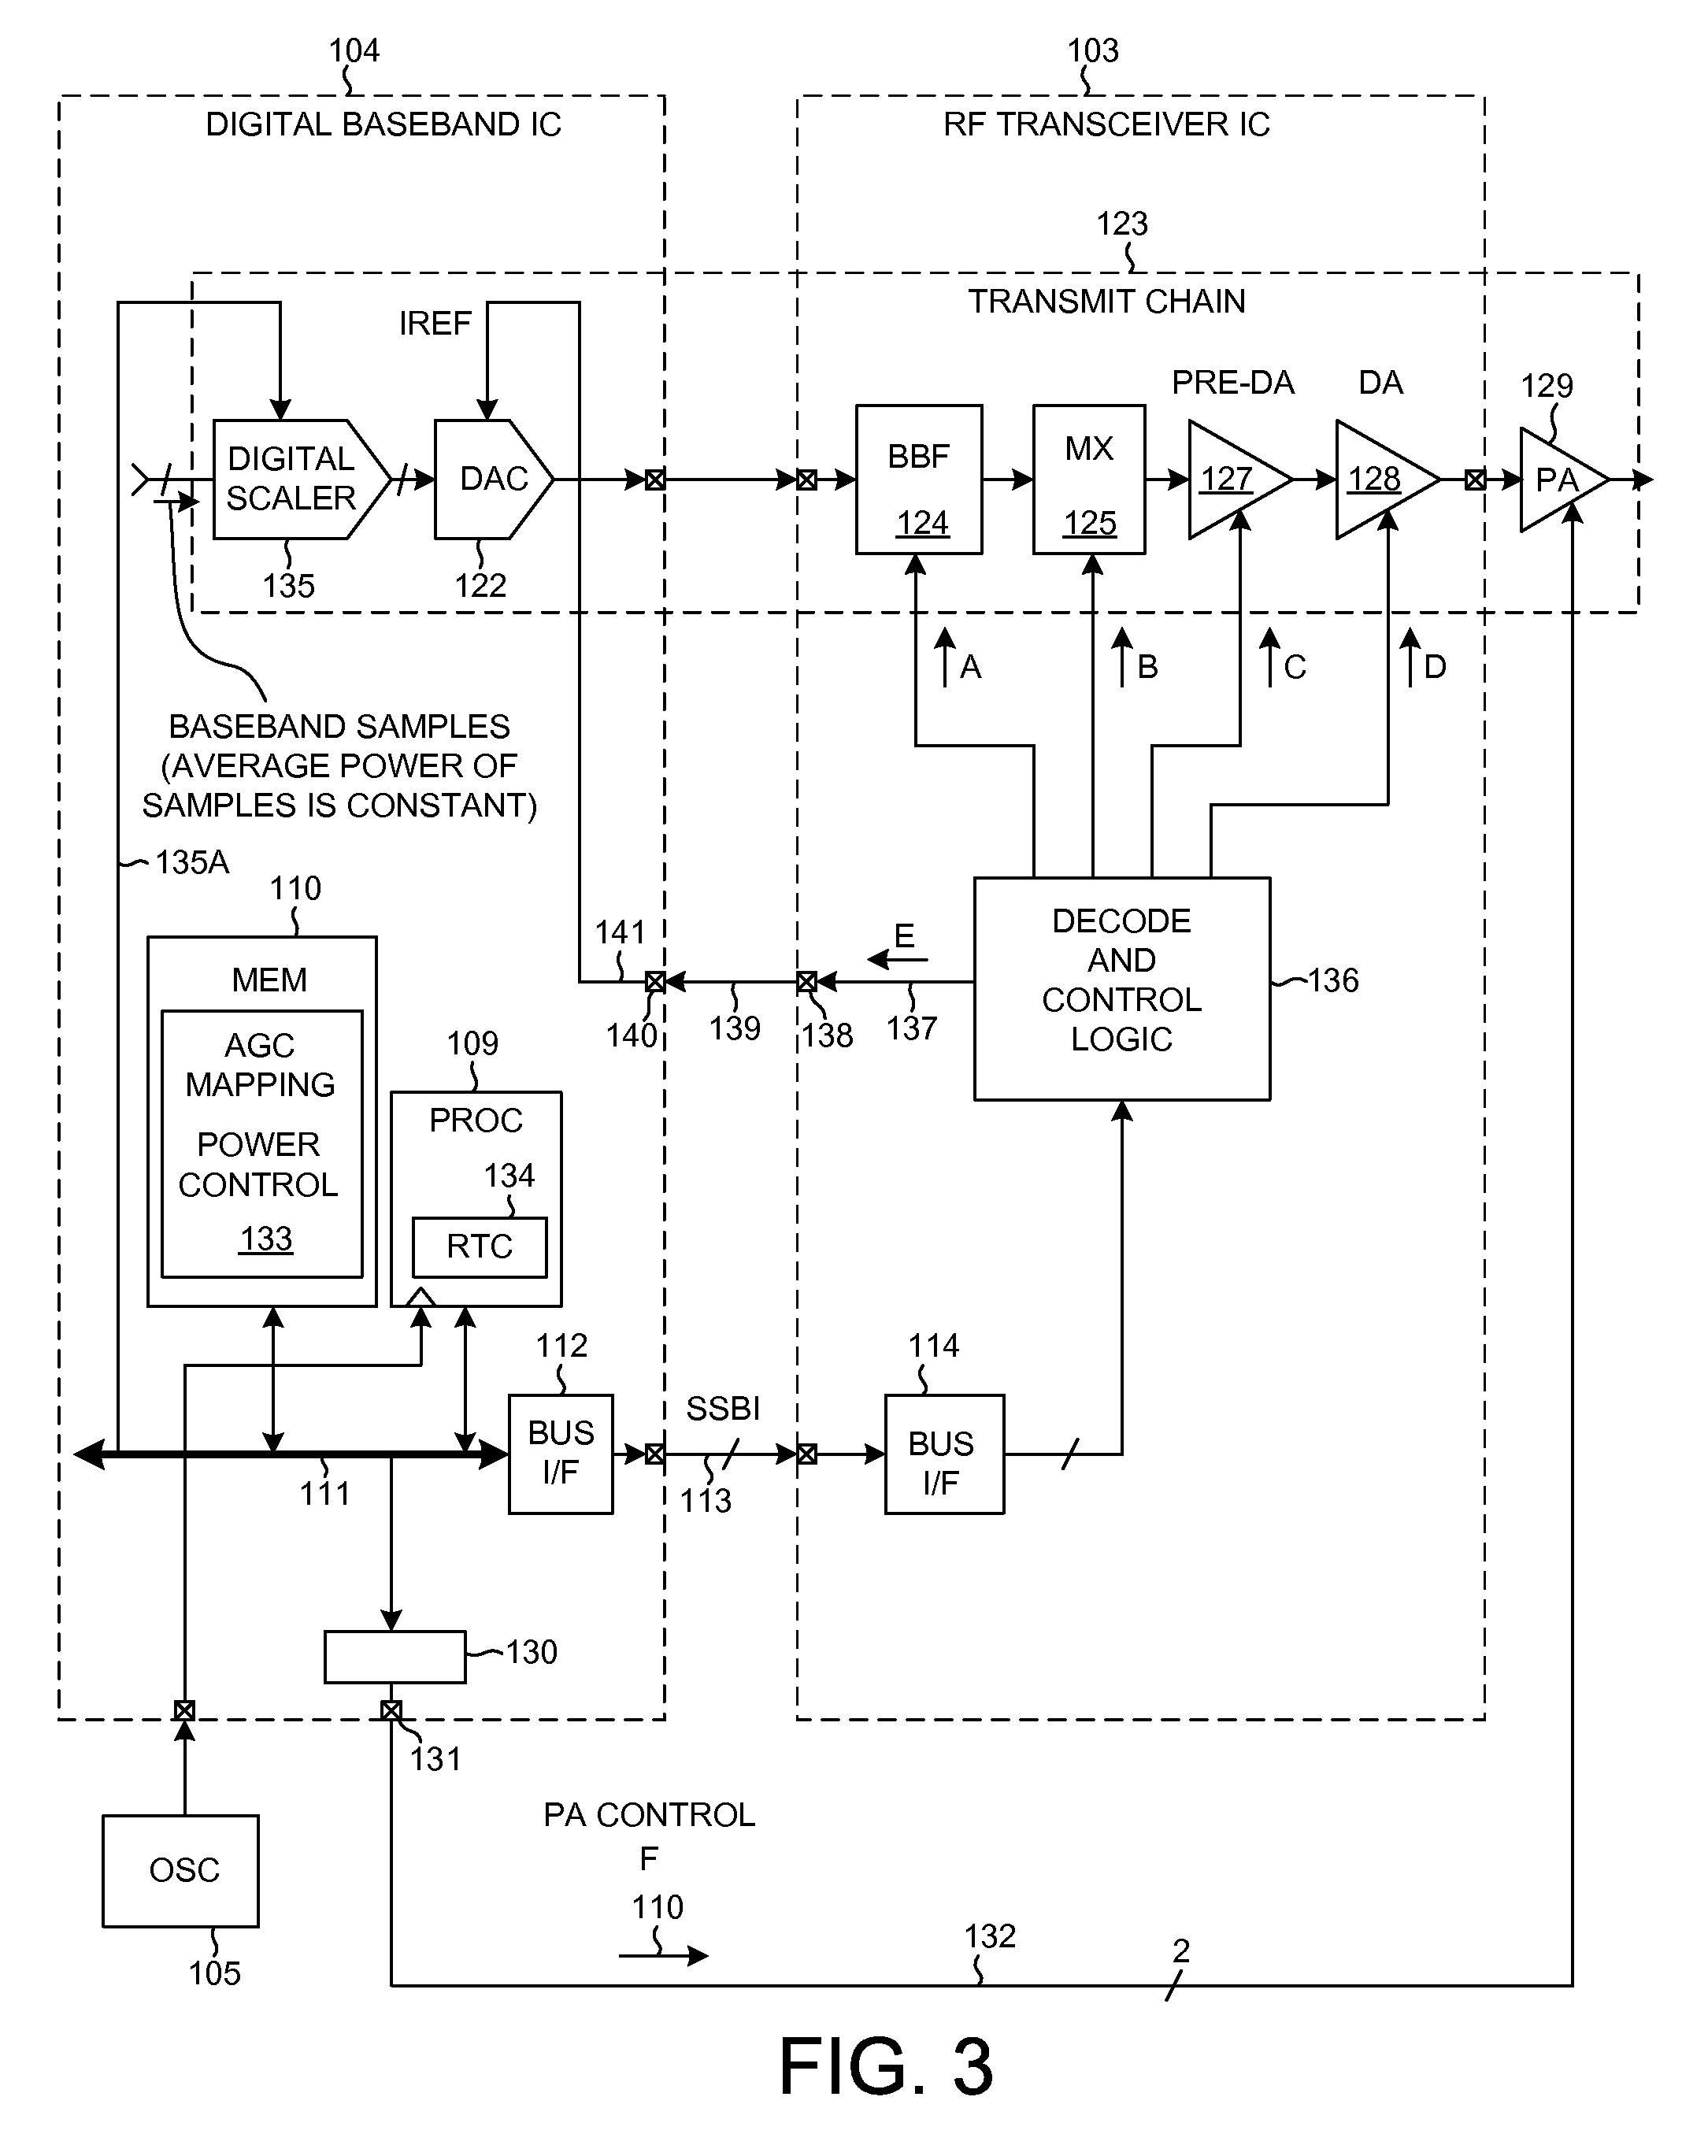 Transmitter chain timing and transmit power control